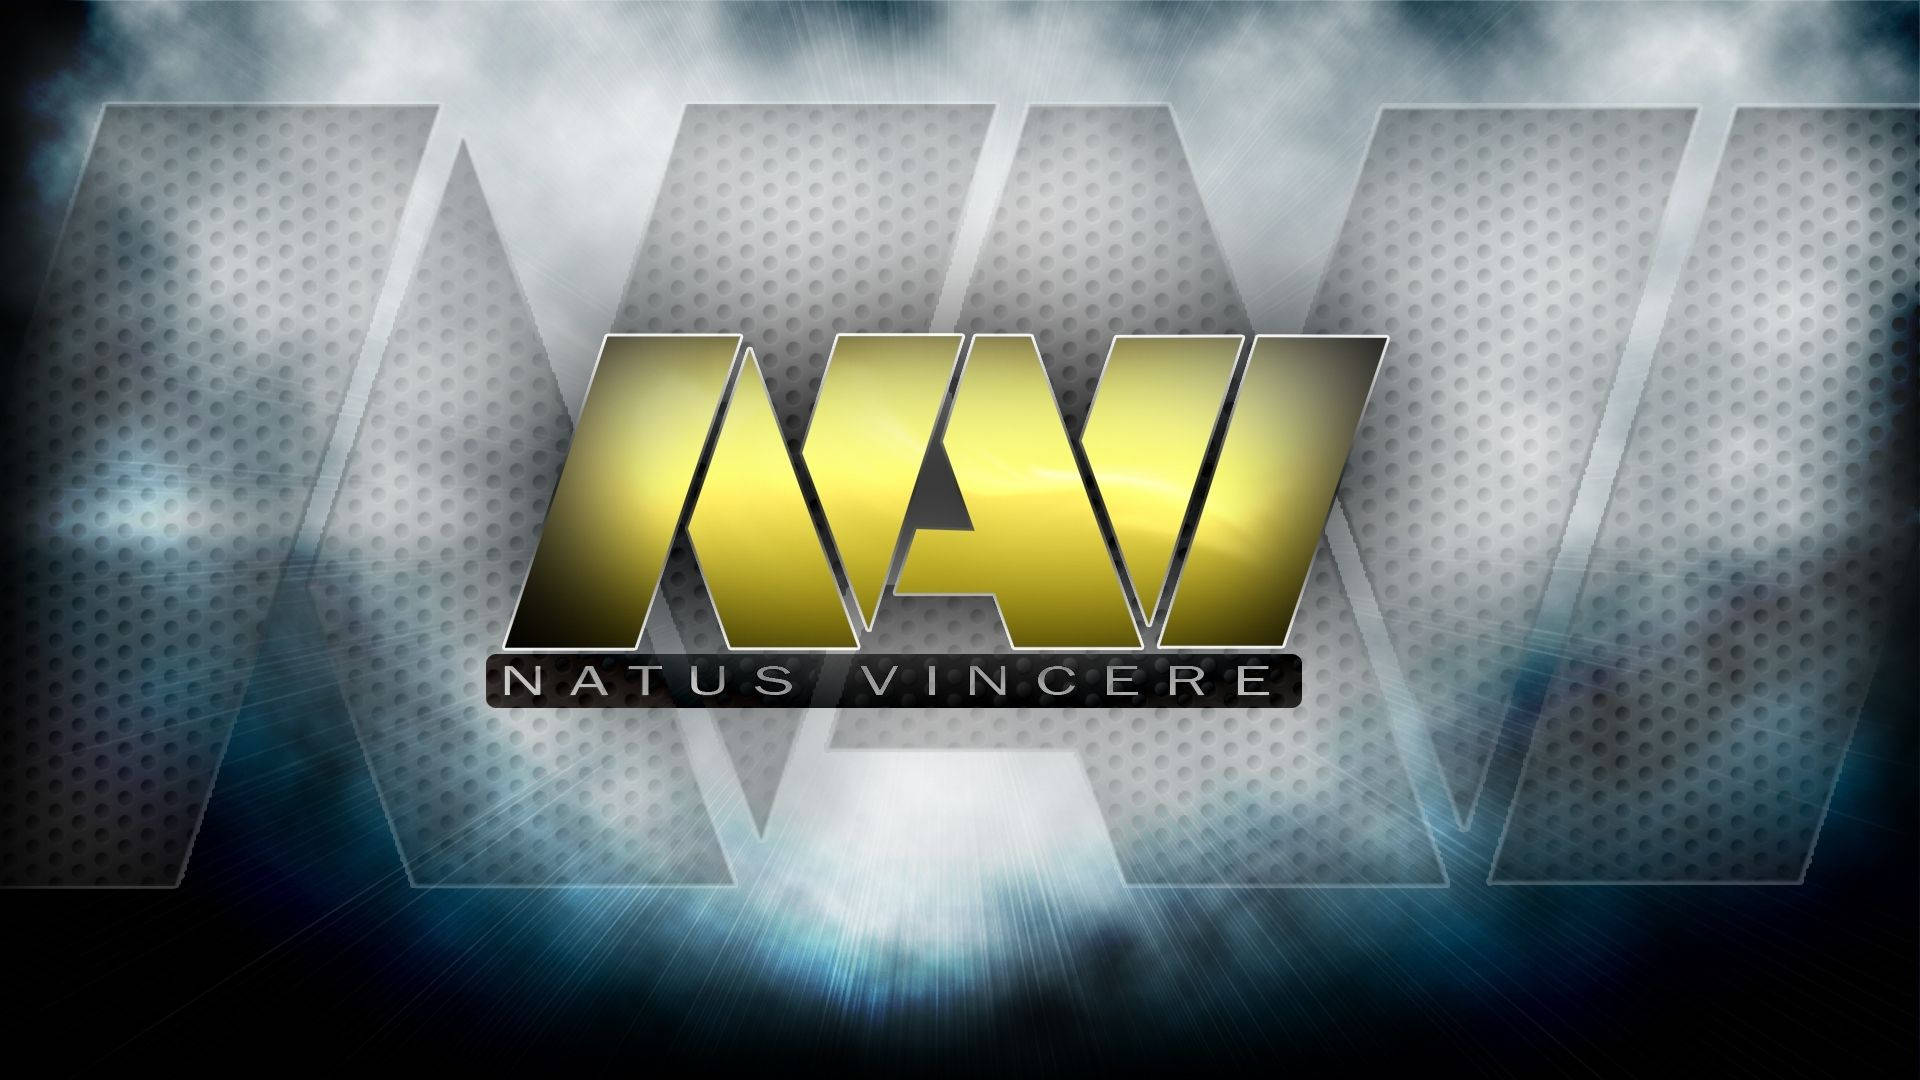 Natus Vincere In Bright Light Background